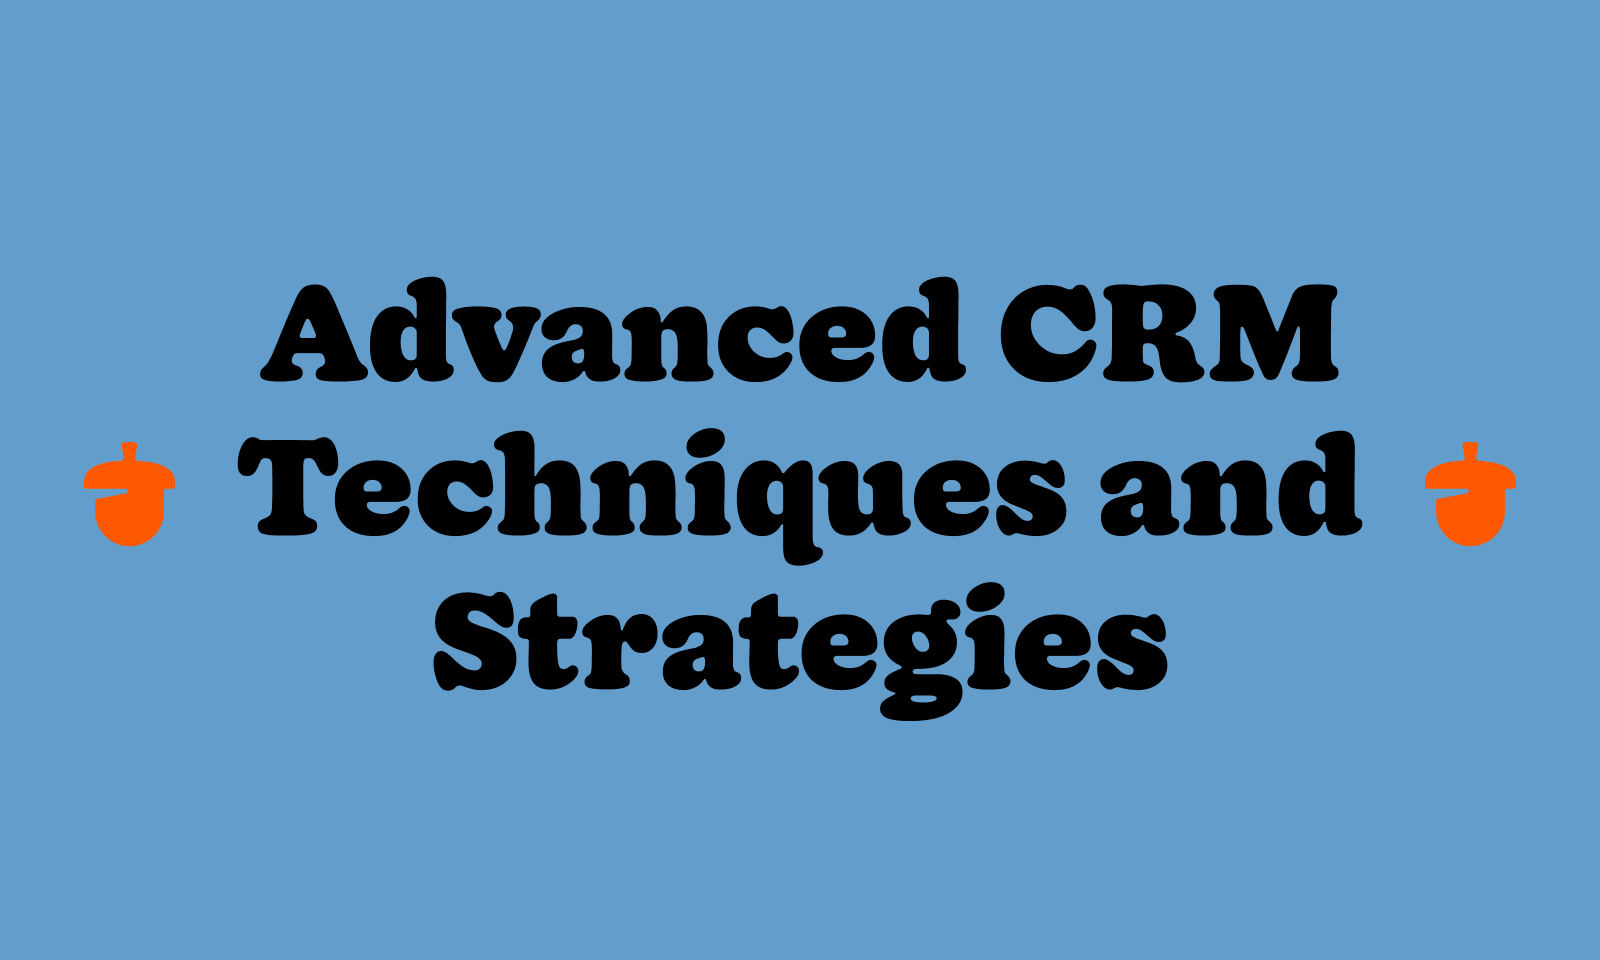 Advanced CRM Techniques and Strategies